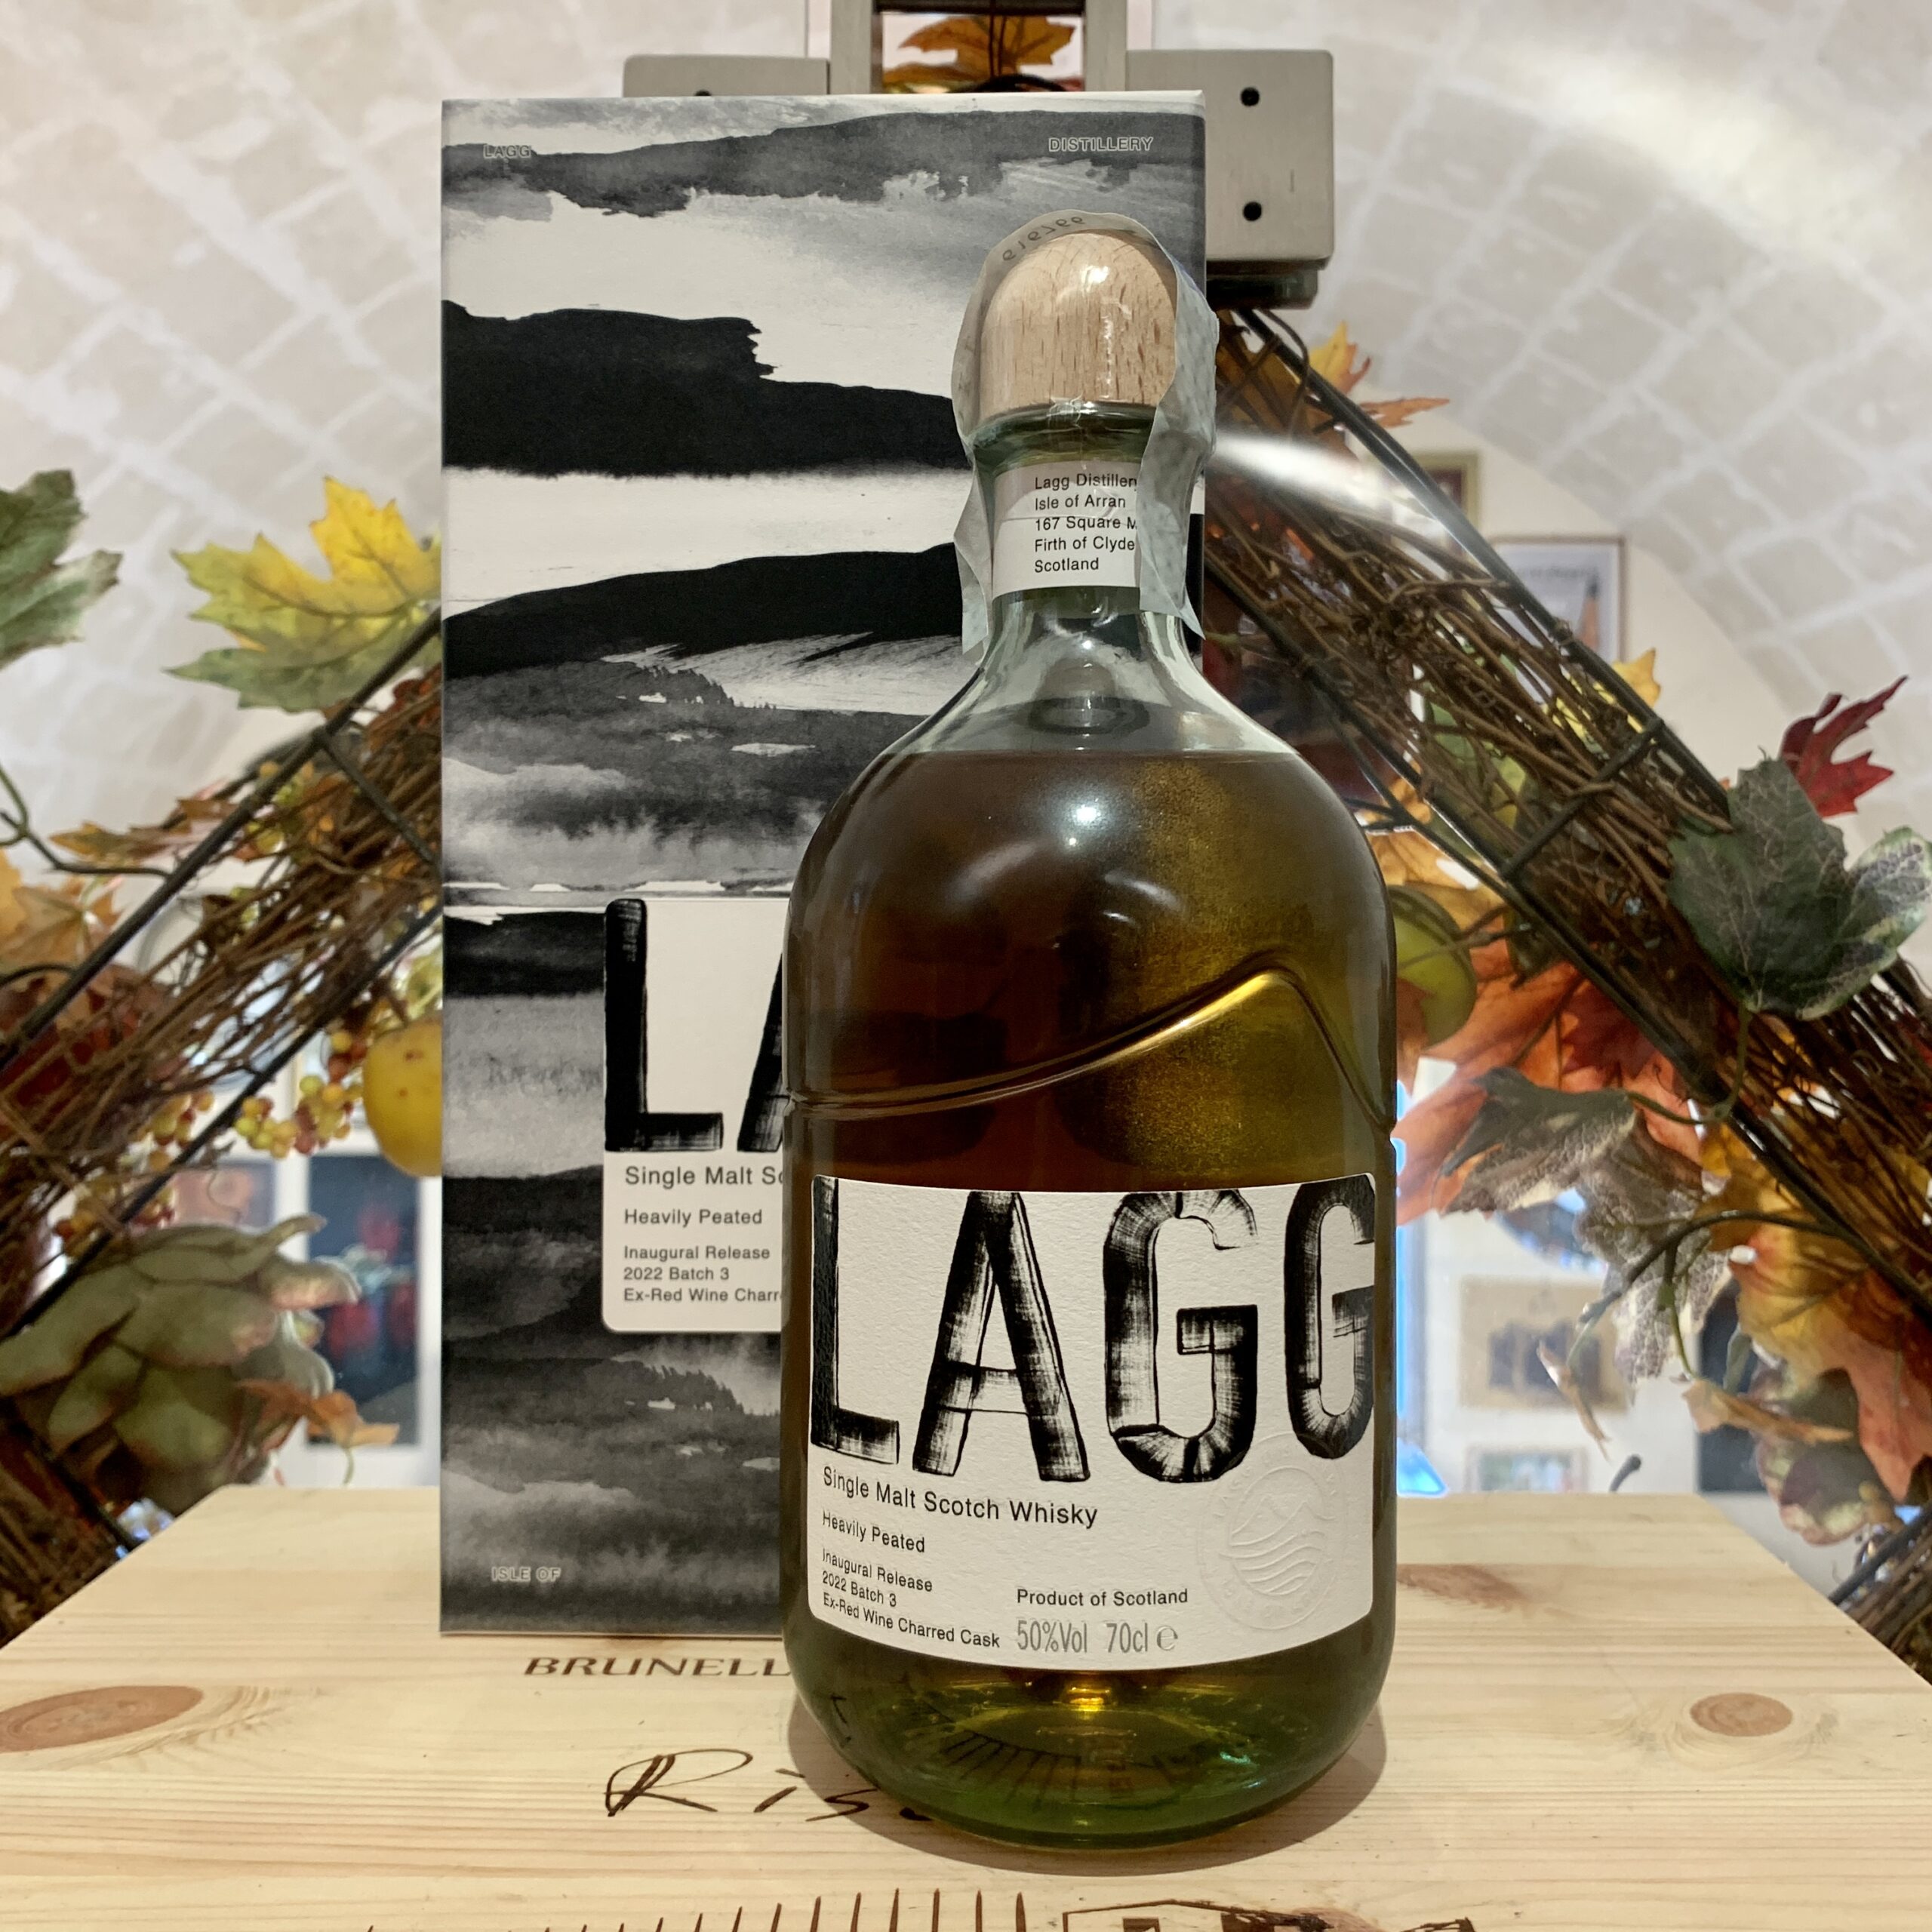 Lagg by Arran Single Malt Scotch Whisky Heavily Peated Inaugural Release 2022 Batch 3 Ex-Rioja Charred Red Wine Cask Finish